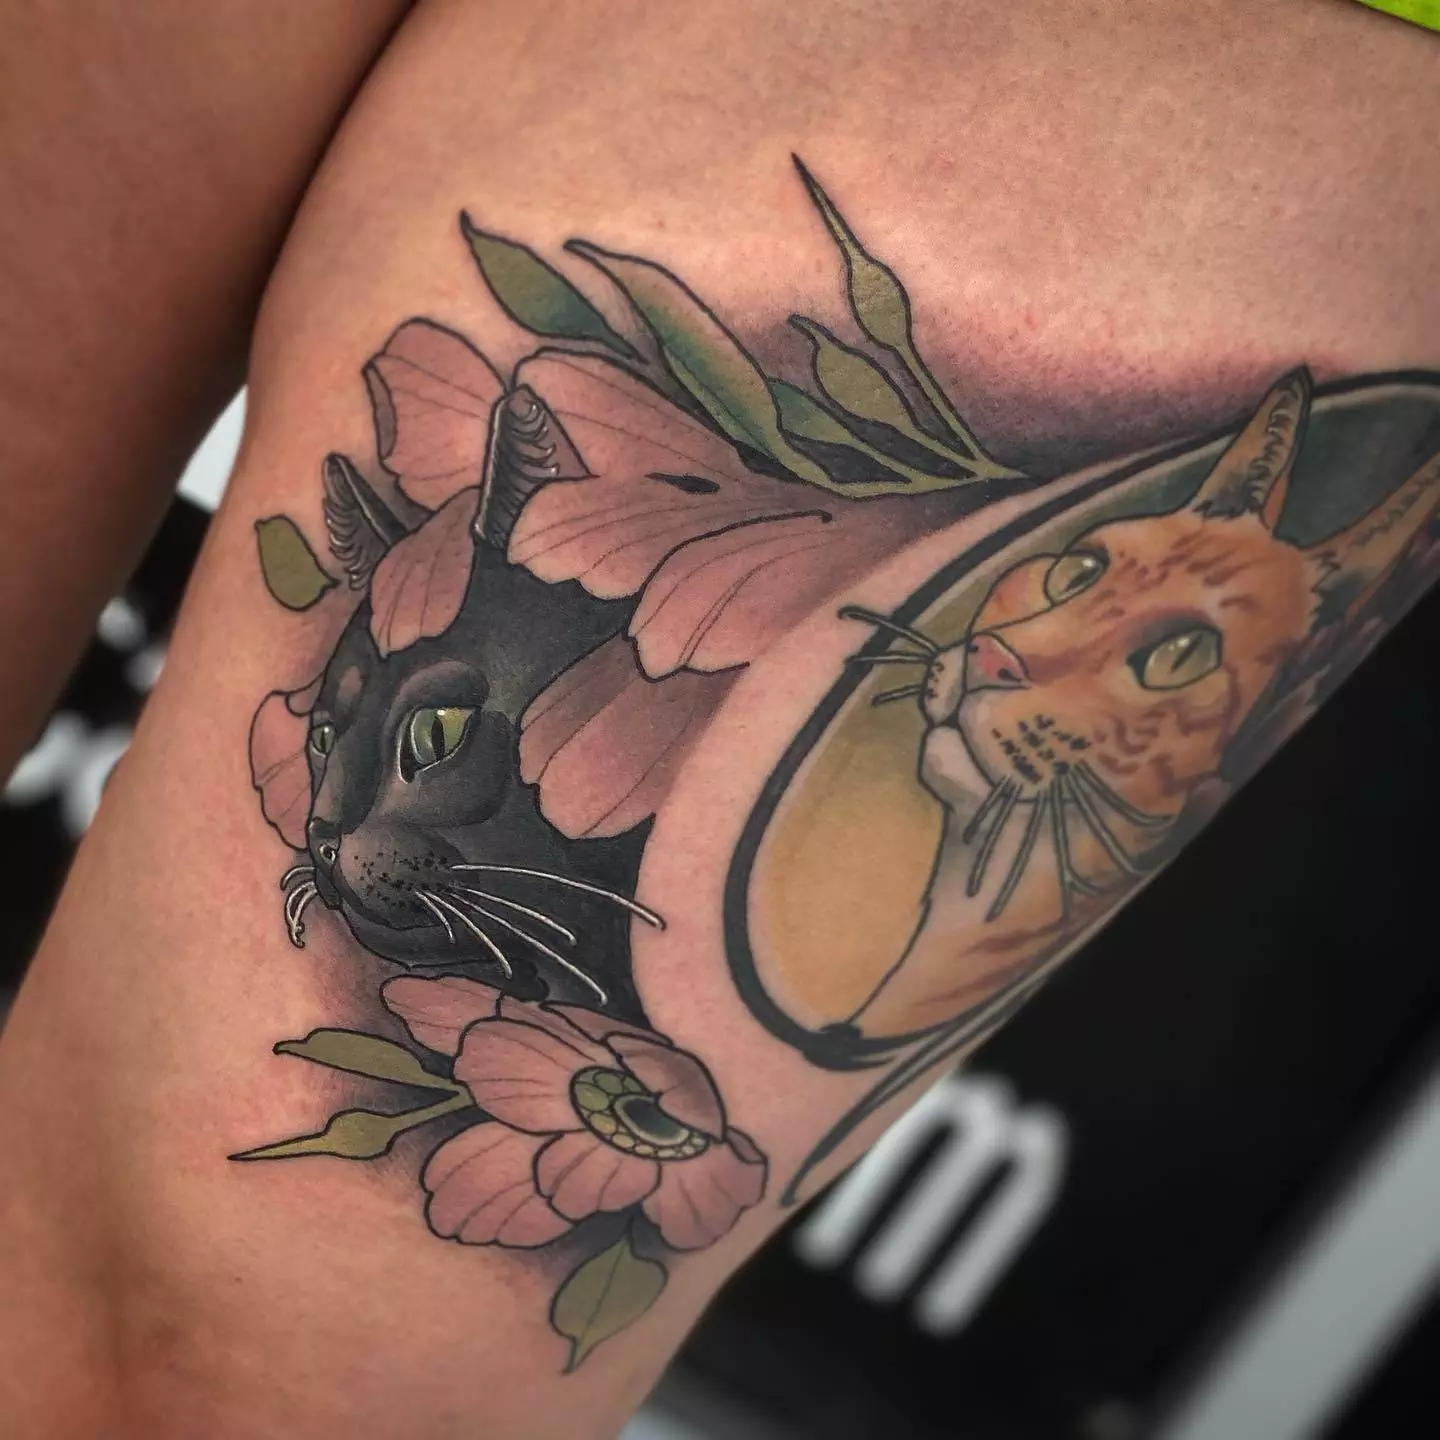 A thigh tattoo featuring a cat and opal lotus flowers.